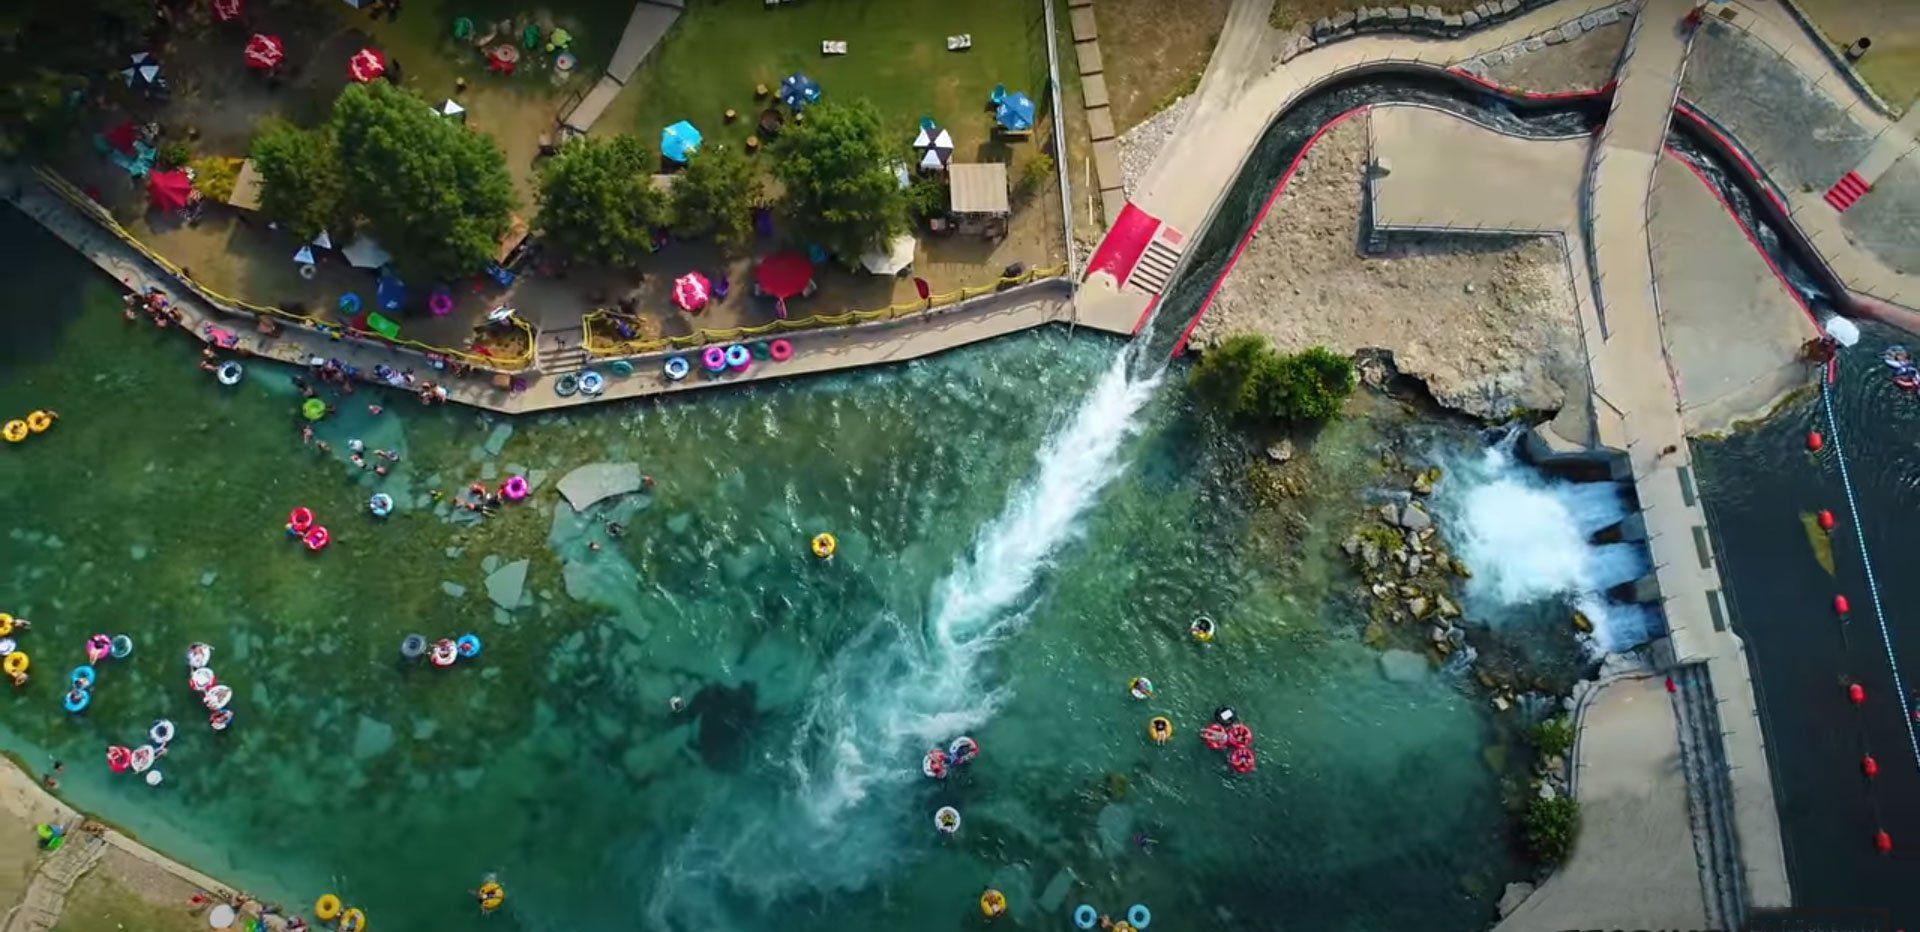 Aerial view of the famous New Braunfels Tube Chute with Texas Tubes